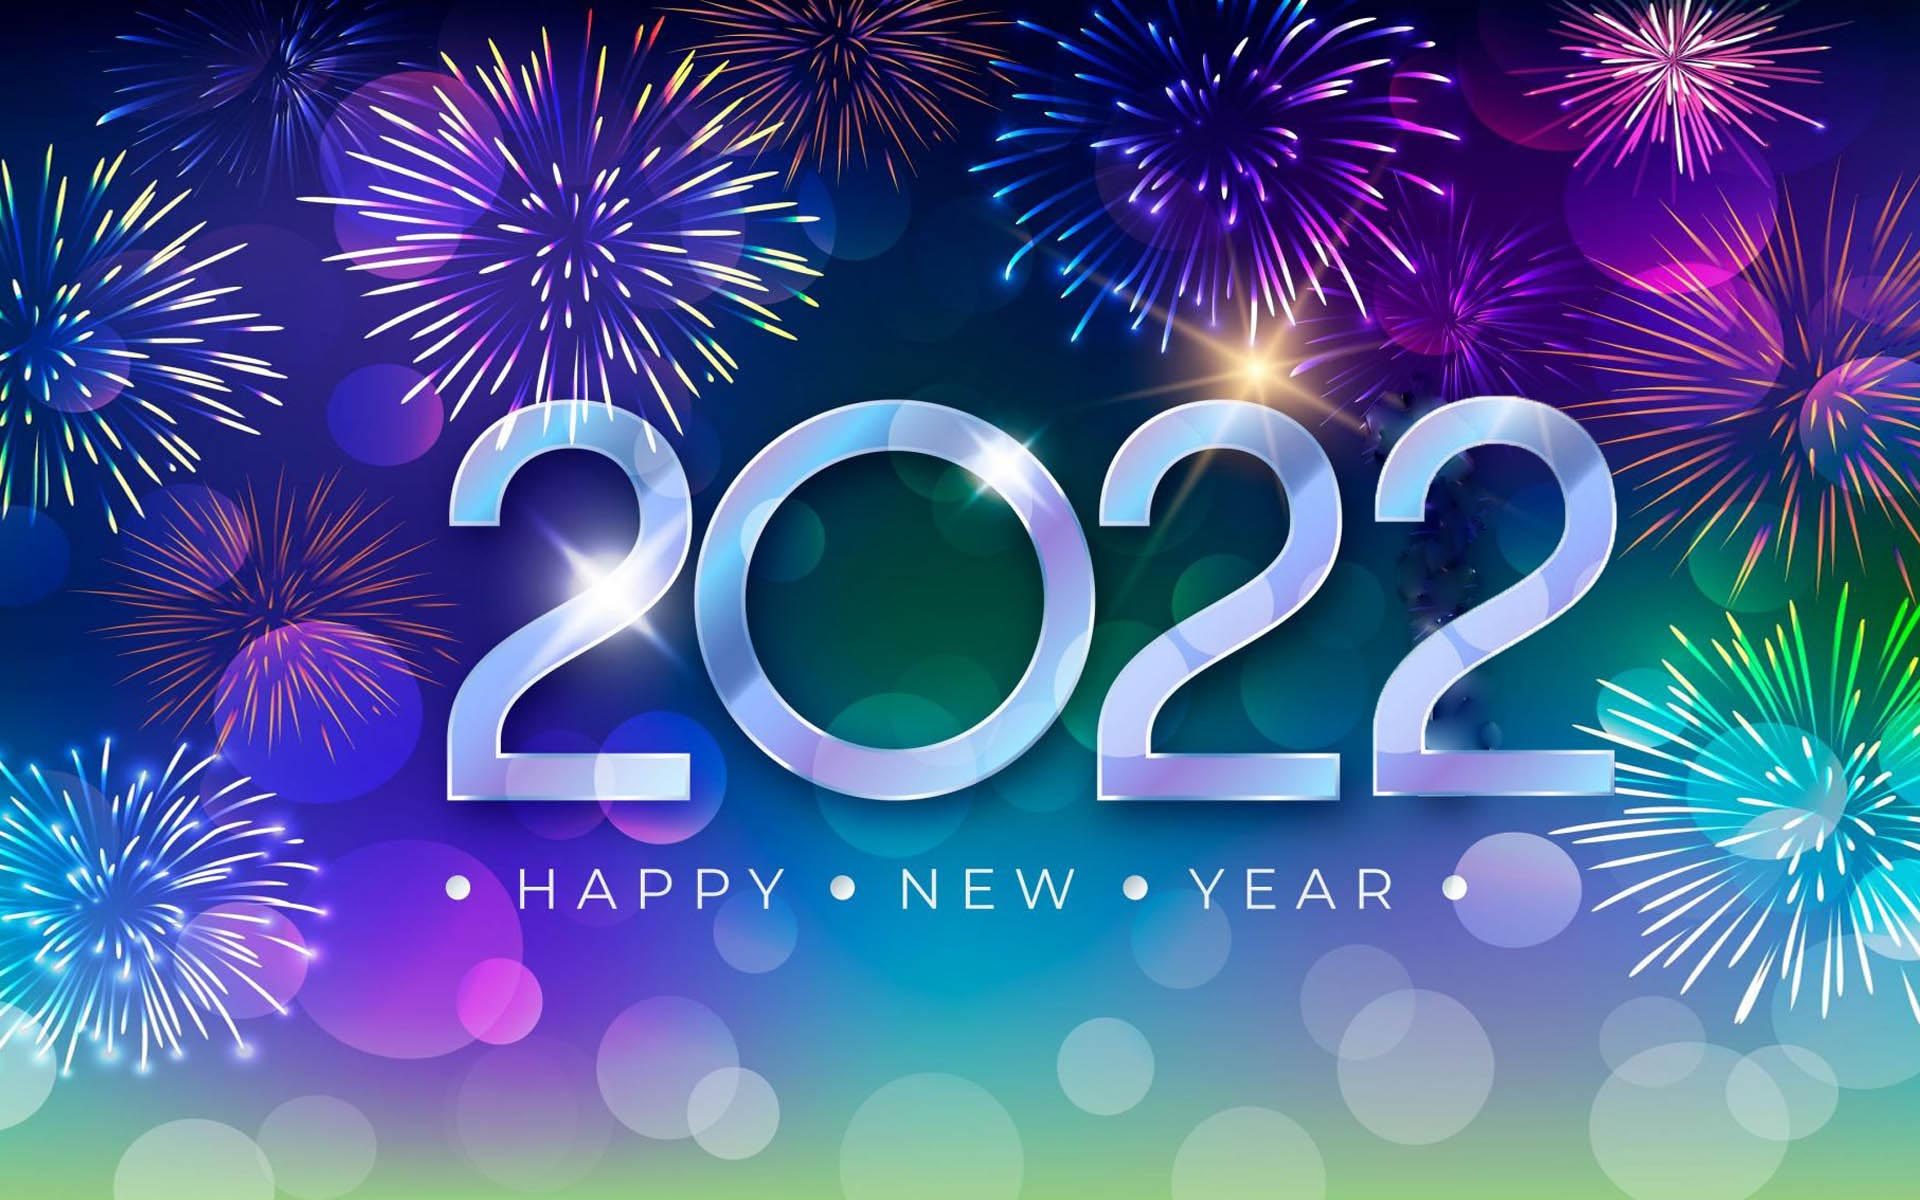 Google Images New Year Wallpapers